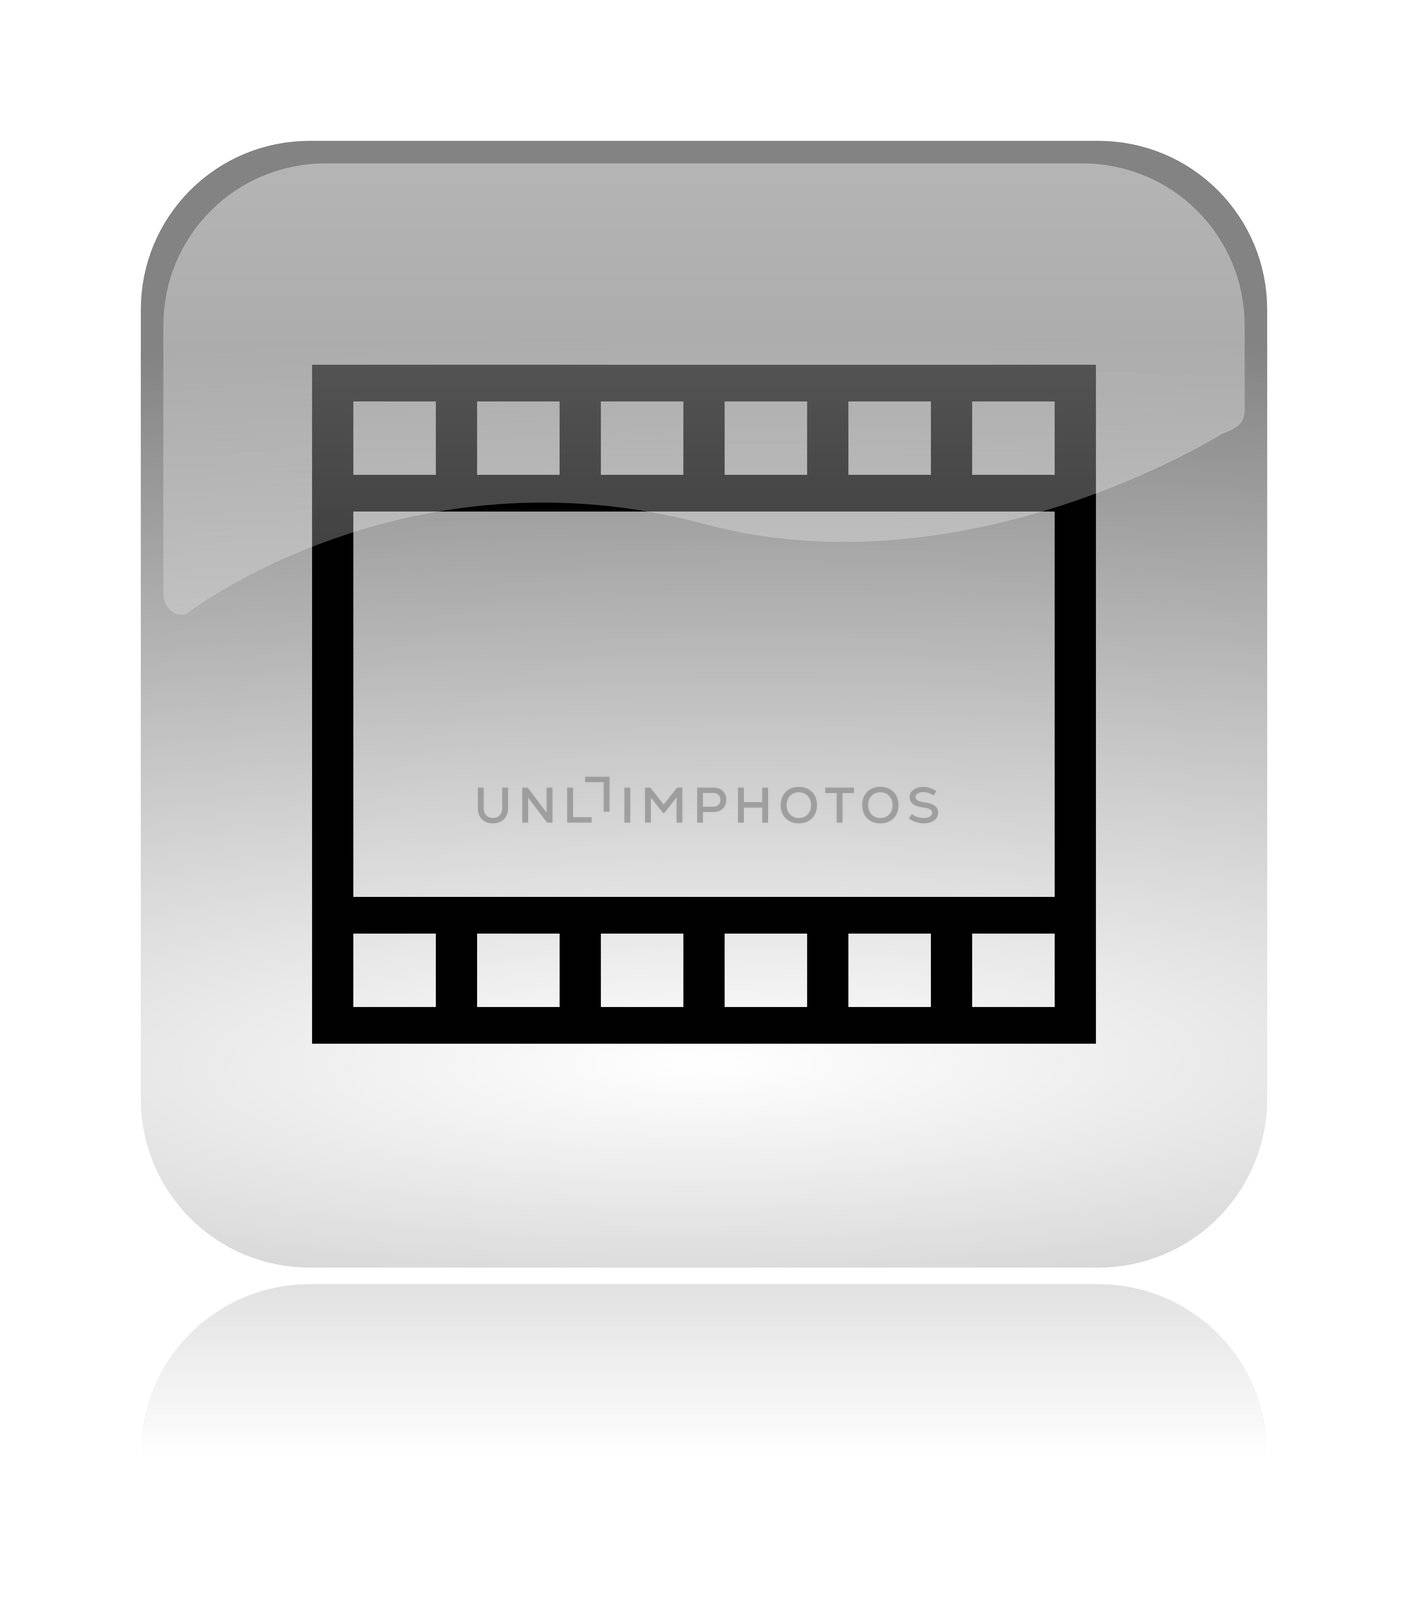 Film and movie web interface icon by make